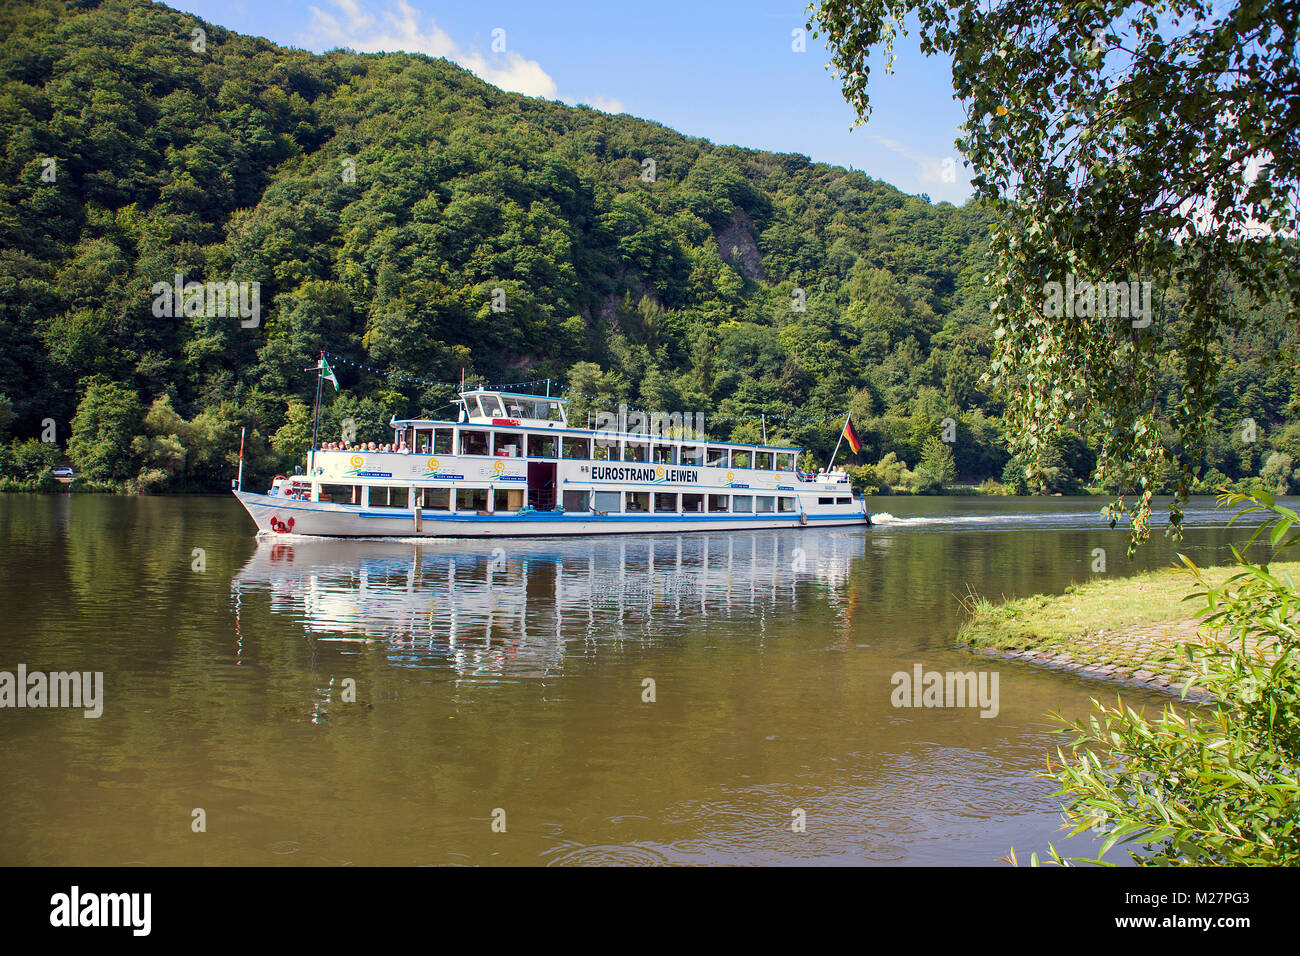 Excursion ship on Moselle river, Minheim, Moselle river, Rhineland-Palatinate, Germany, Europe Stock Photo